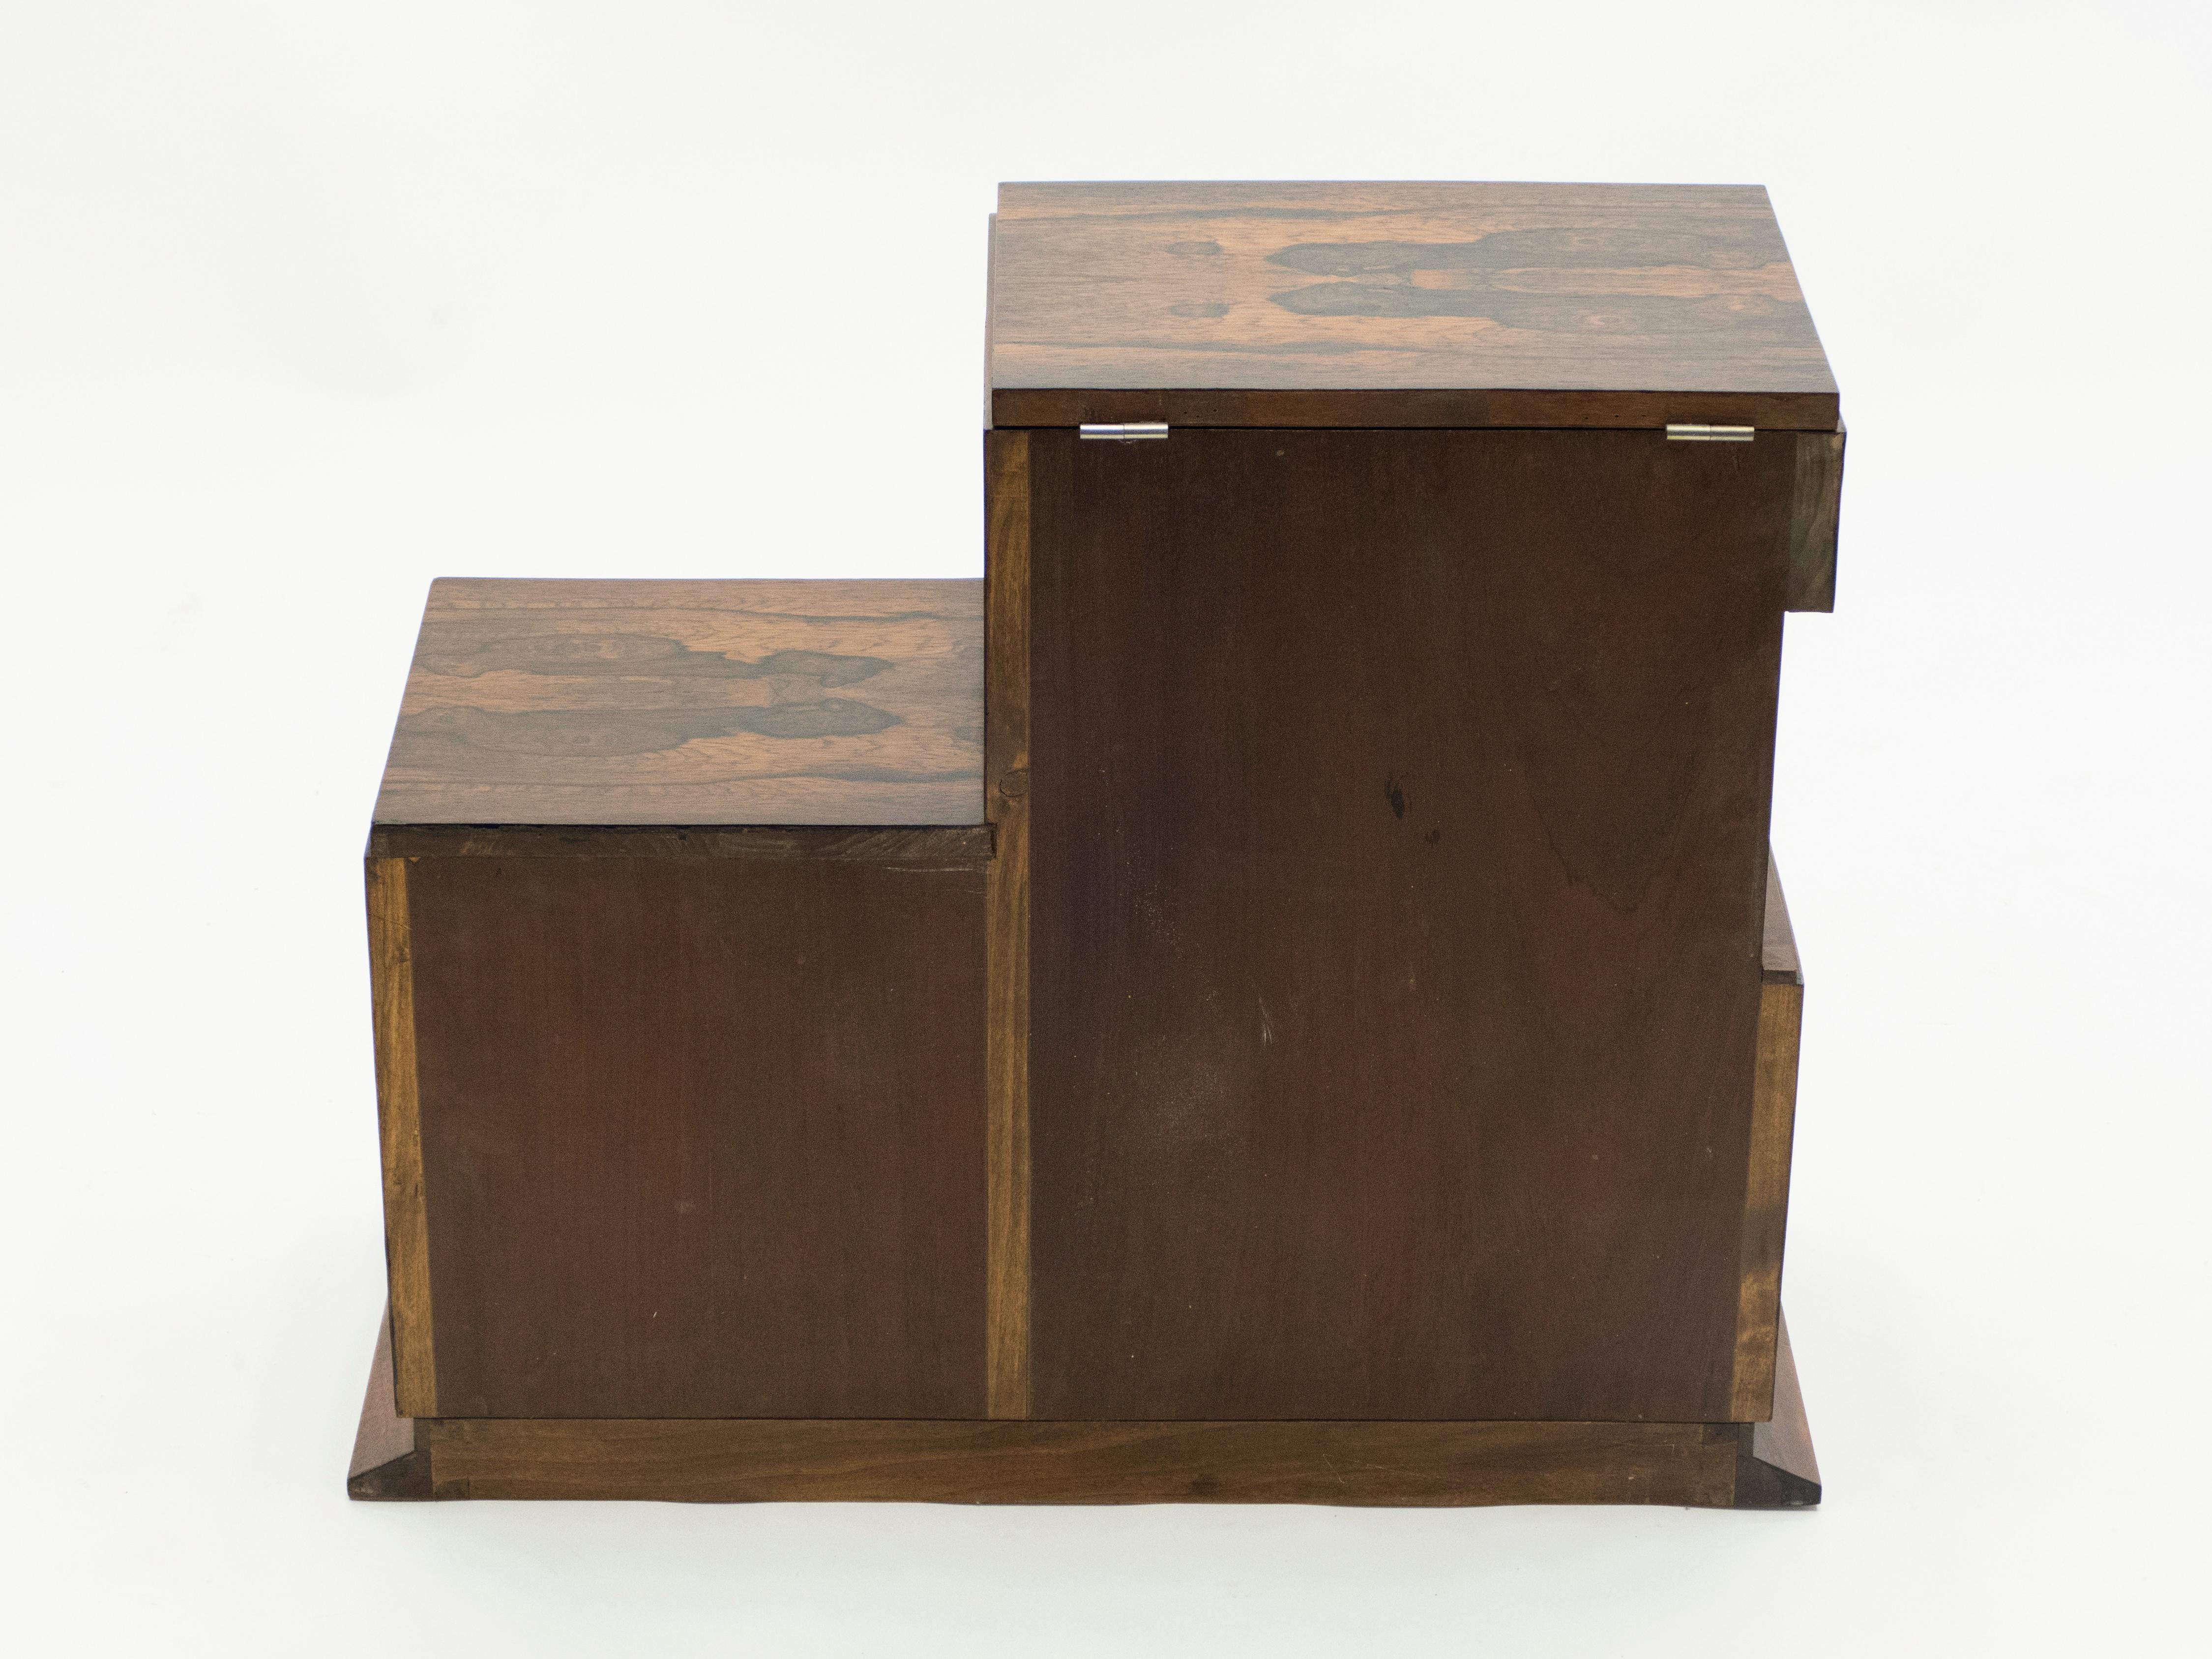 French Art Deco Modernist Rosewood Brass Sewing Cabinet, 1940s For Sale 6